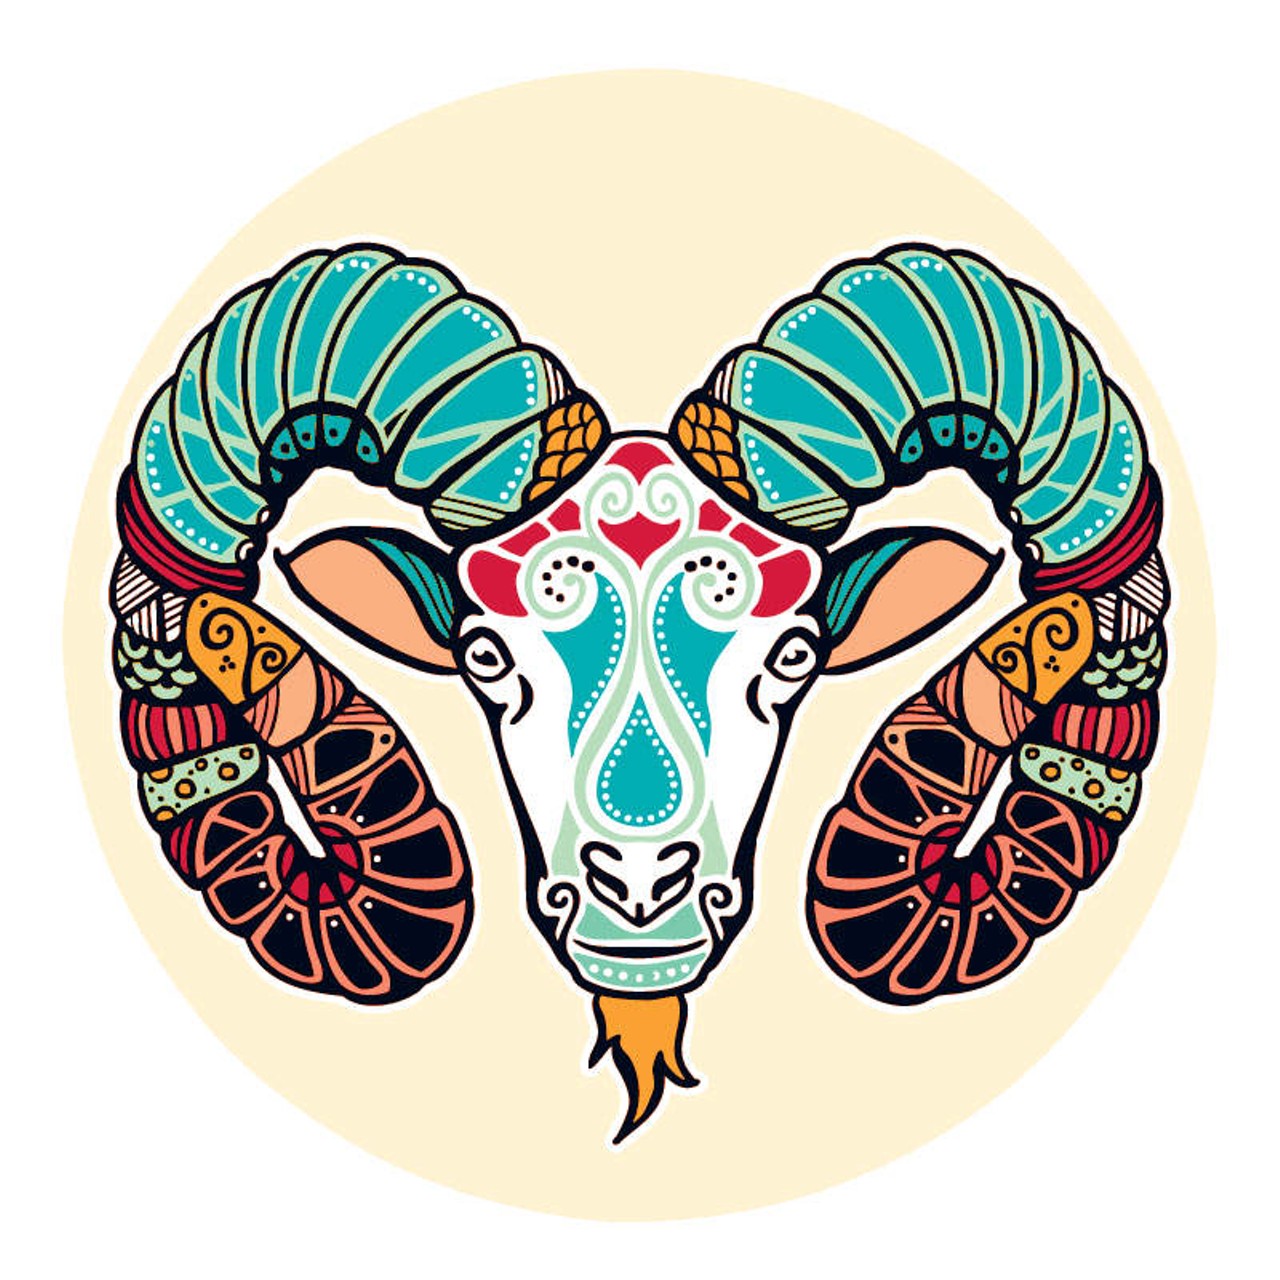 ARIES: March 21 &#150; April 20
You thought you knew everything. Now all of a sudden your whole paradigm is getting turned upside down by experiences that have come to show you a little bit more about what&#146;s true. Some of you are OK with the idea that it&#146;s time to shed your skin, and all of you would be better off if you could let the old story give way to whatever you have yet to learn about life and about yourself. Recent lessons, along with influences that have had a humbling effect, need to sink into the deeper aspects of your being before what&#146;s next can take root and support you from here on out.